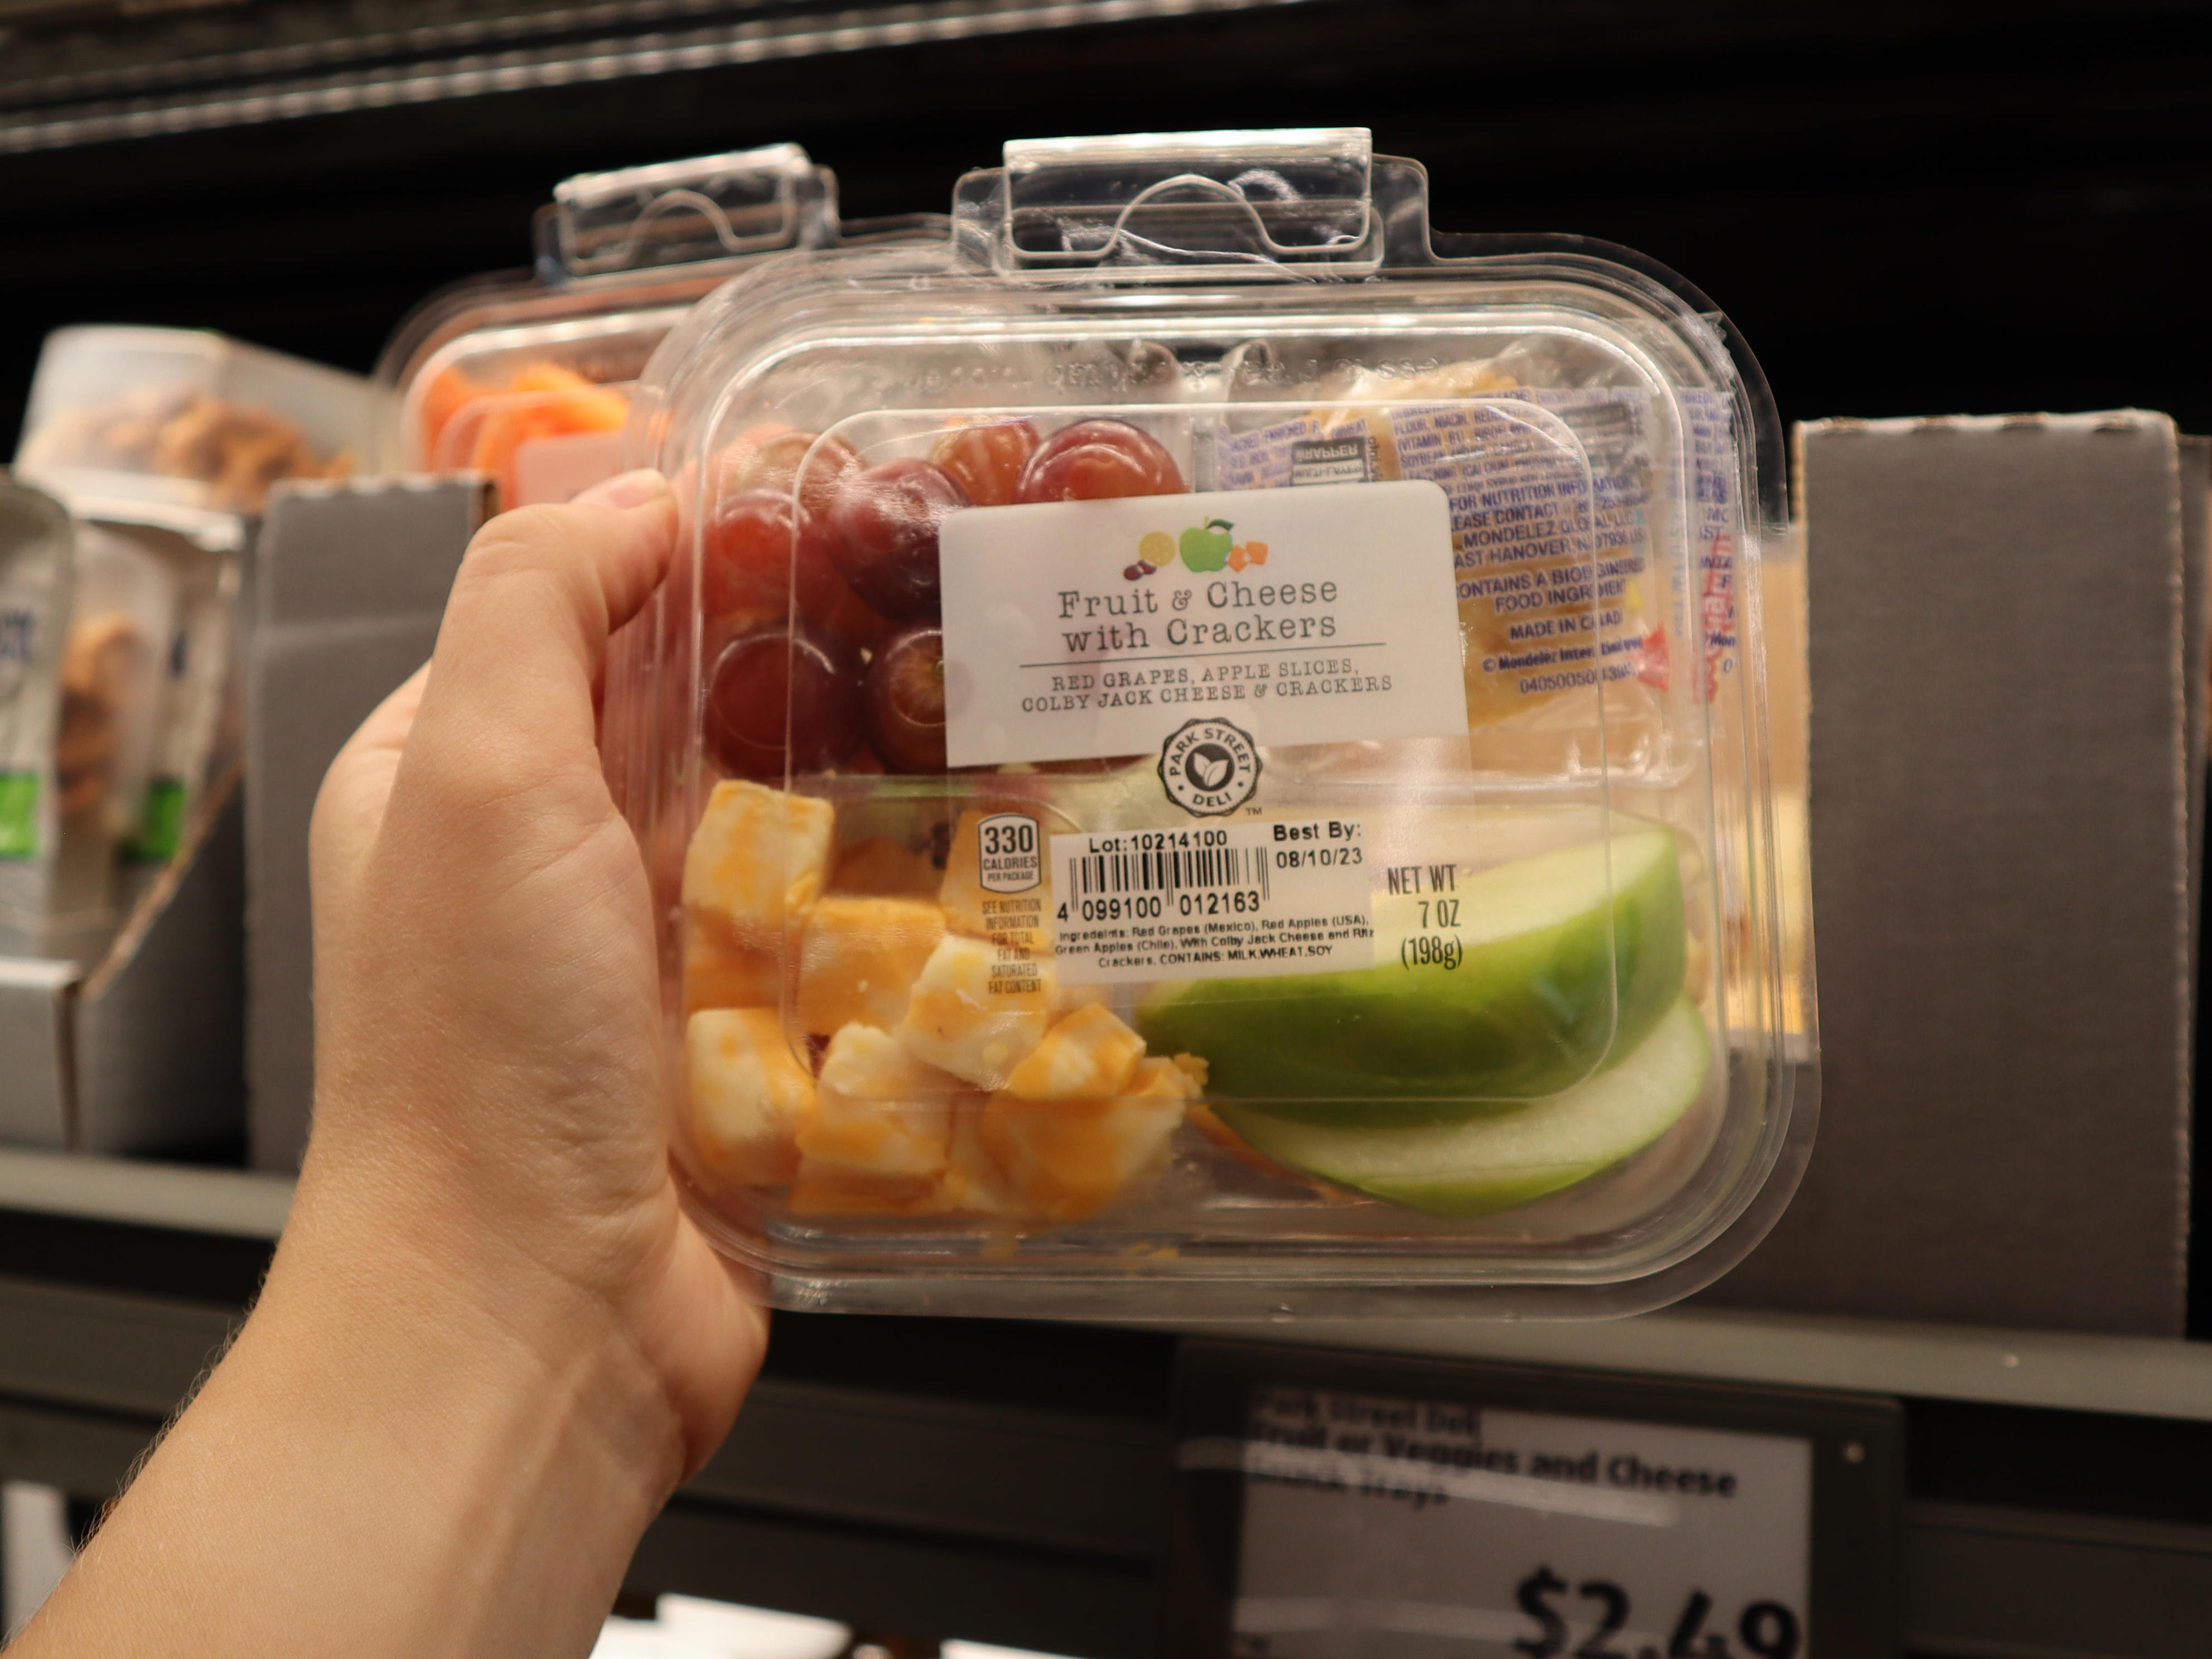 <p>My partner and I try to avoid purchasing any food or drinks on planes by bringing our own snacks.</p><p>We like to pick up the Park Street Deli fruit, cheese, and cracker trays, which cost $2.50, or the meat, cheese, and breadstick Italian snack trays, which cost about $3.</p><p>Whichever we choose, packing them <a href="https://www.insider.com/best-tips-grocery-shopping-budget-aldi-employee">saves us from wasting money</a> and time waiting for the drink cart to reach our row.</p>